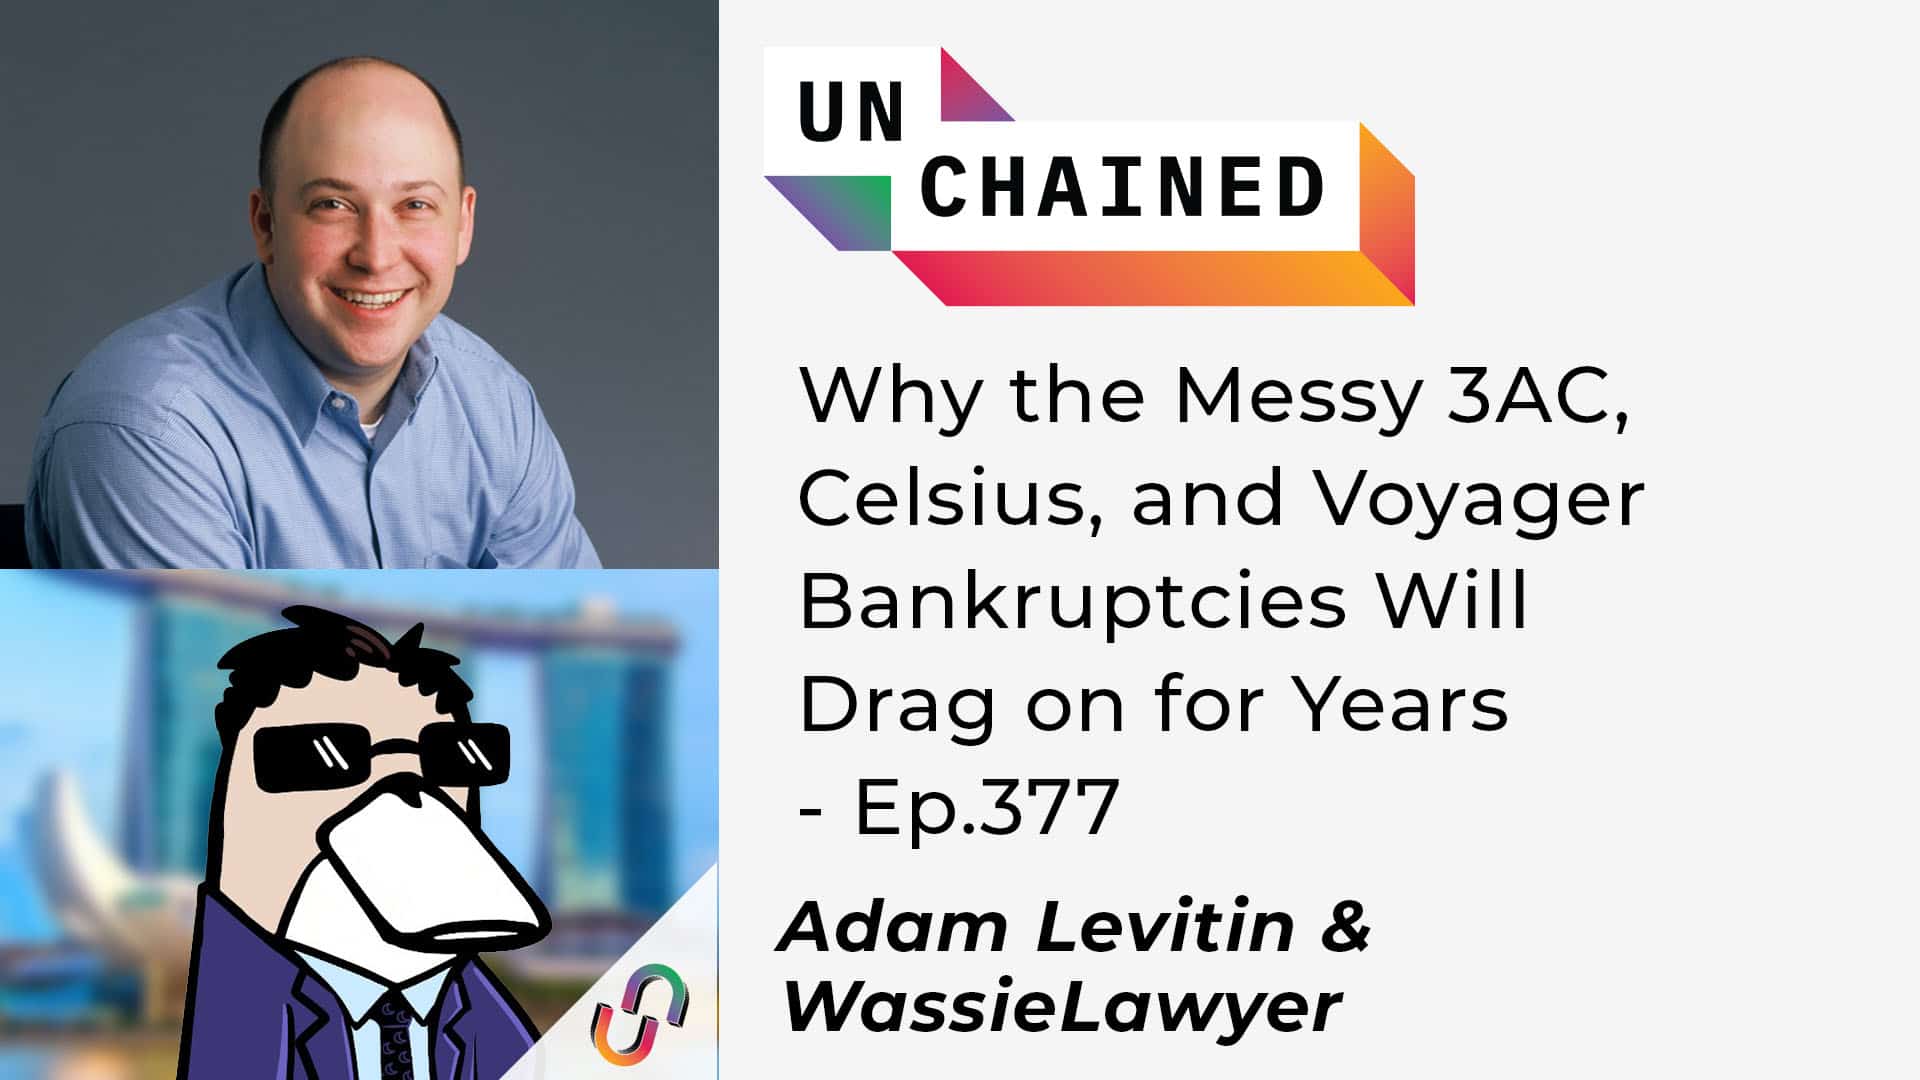 Why the Messy 3AC, Celsius, and Voyager Bankruptcies Will Drag on for Years - Ep.377